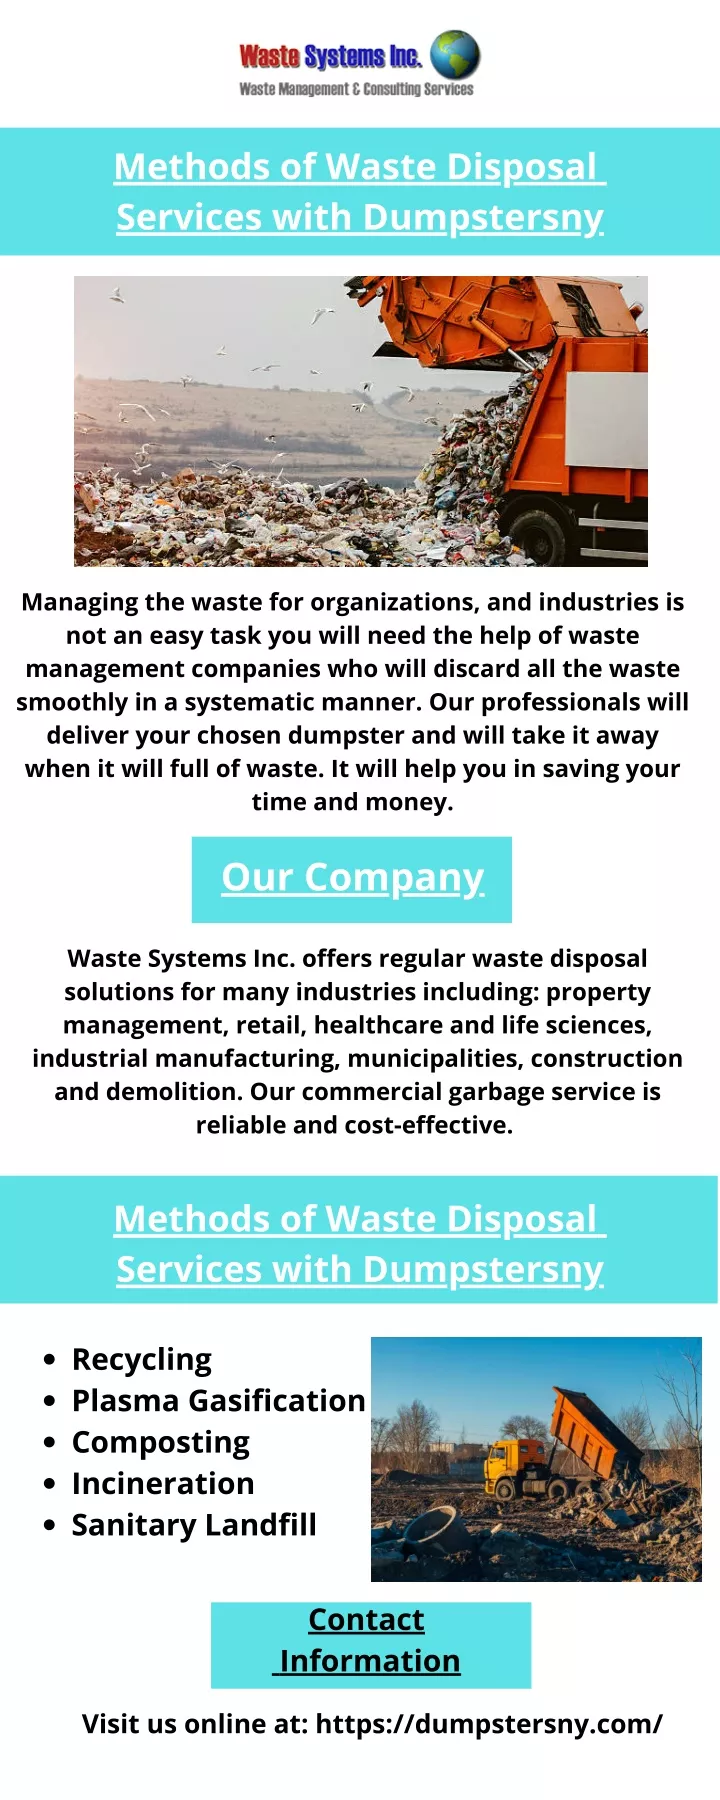 methods of waste disposal services with